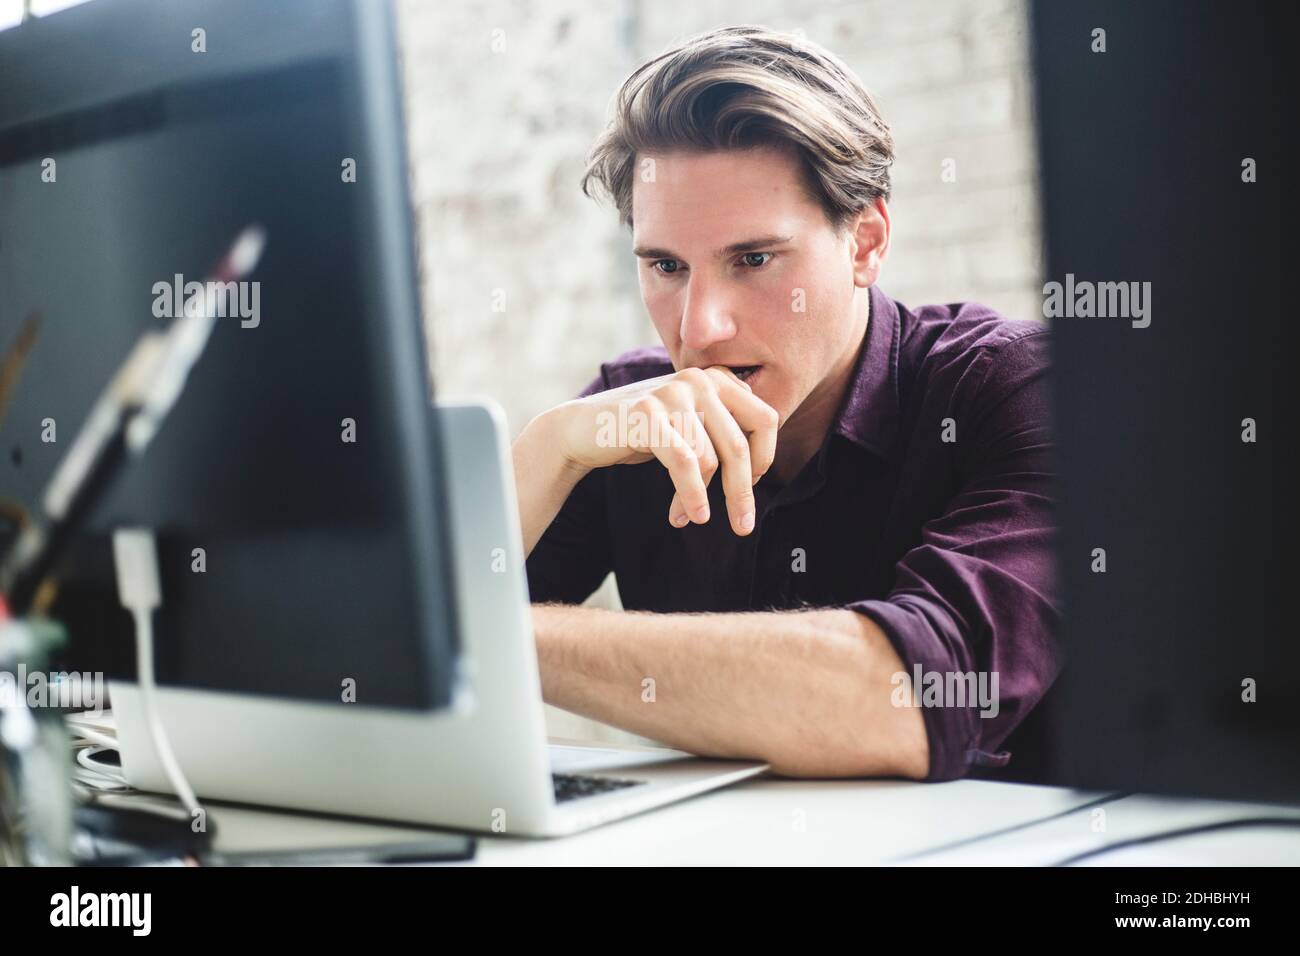 Serious male IT professional thinking while coding in laptop at creative workplace Stock Photo